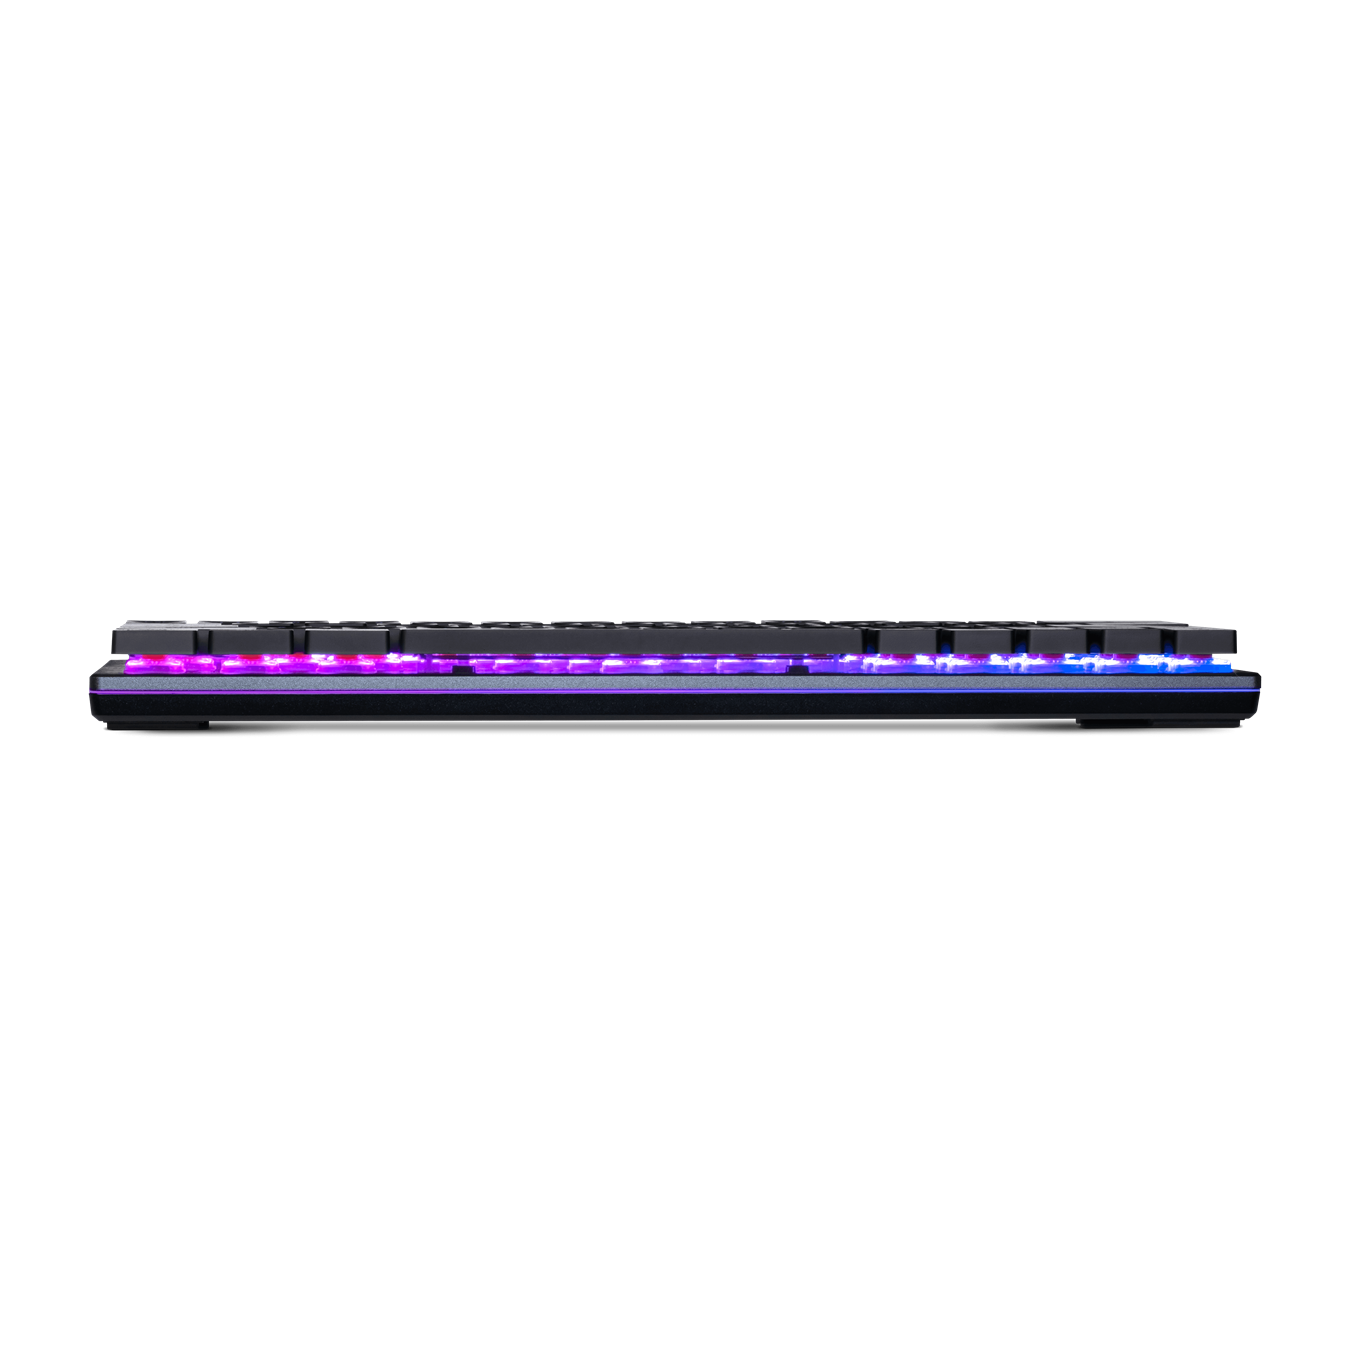 SK621 Low Profile Wireless Mechanical Keyboard - uses N-key rollover technology that results in the most efficient, accurate anti-ghosting technology yet